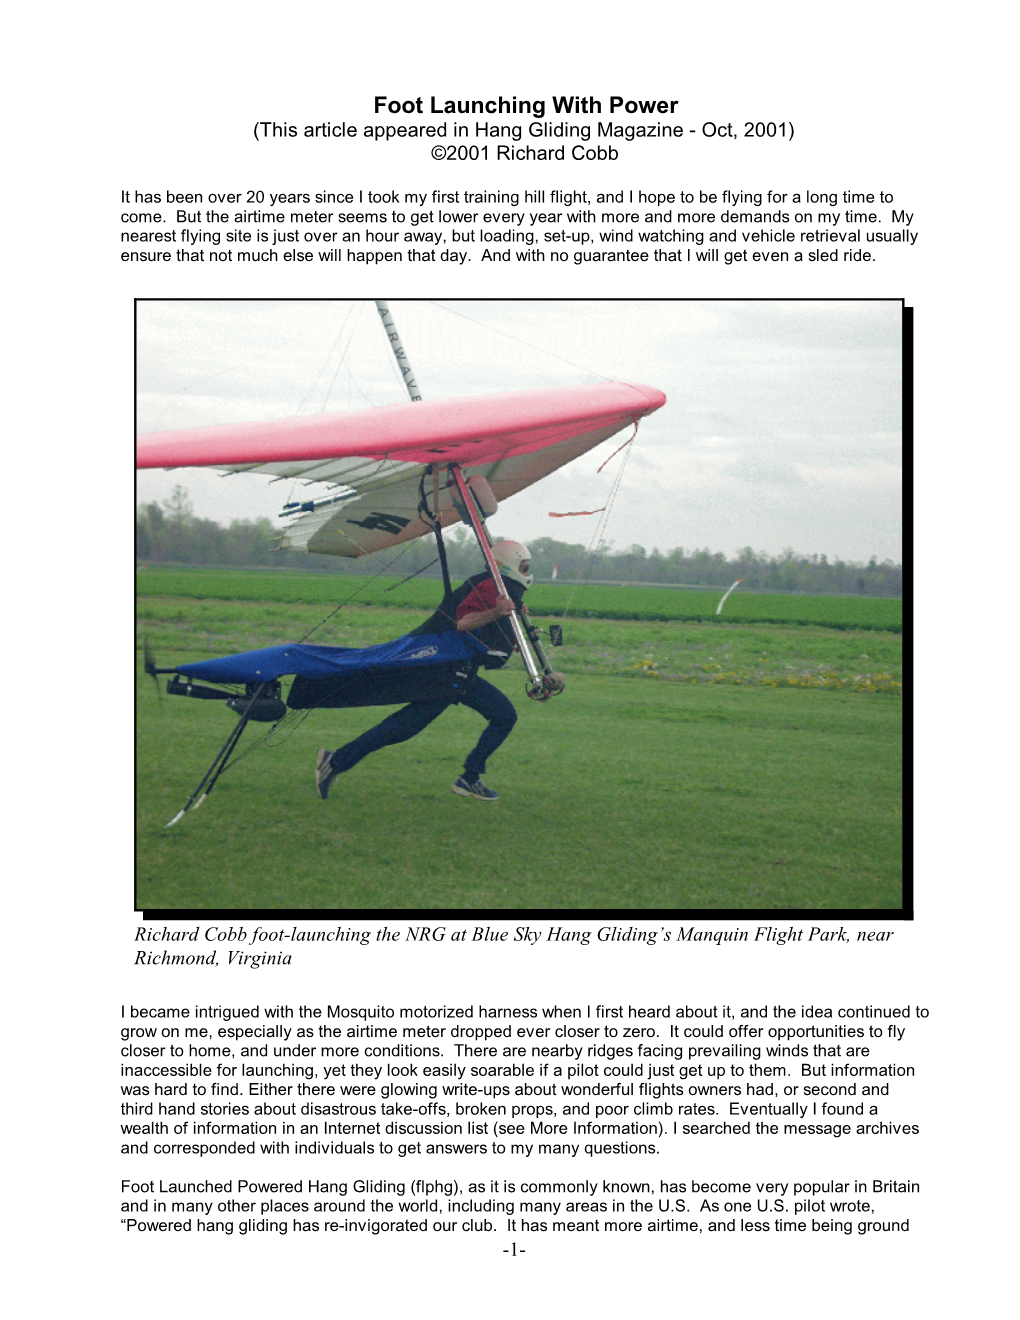 Foot Launching with Power (This Article Appeared in Hang Gliding Magazine - Oct, 2001) “ 2001 Richard Cobb